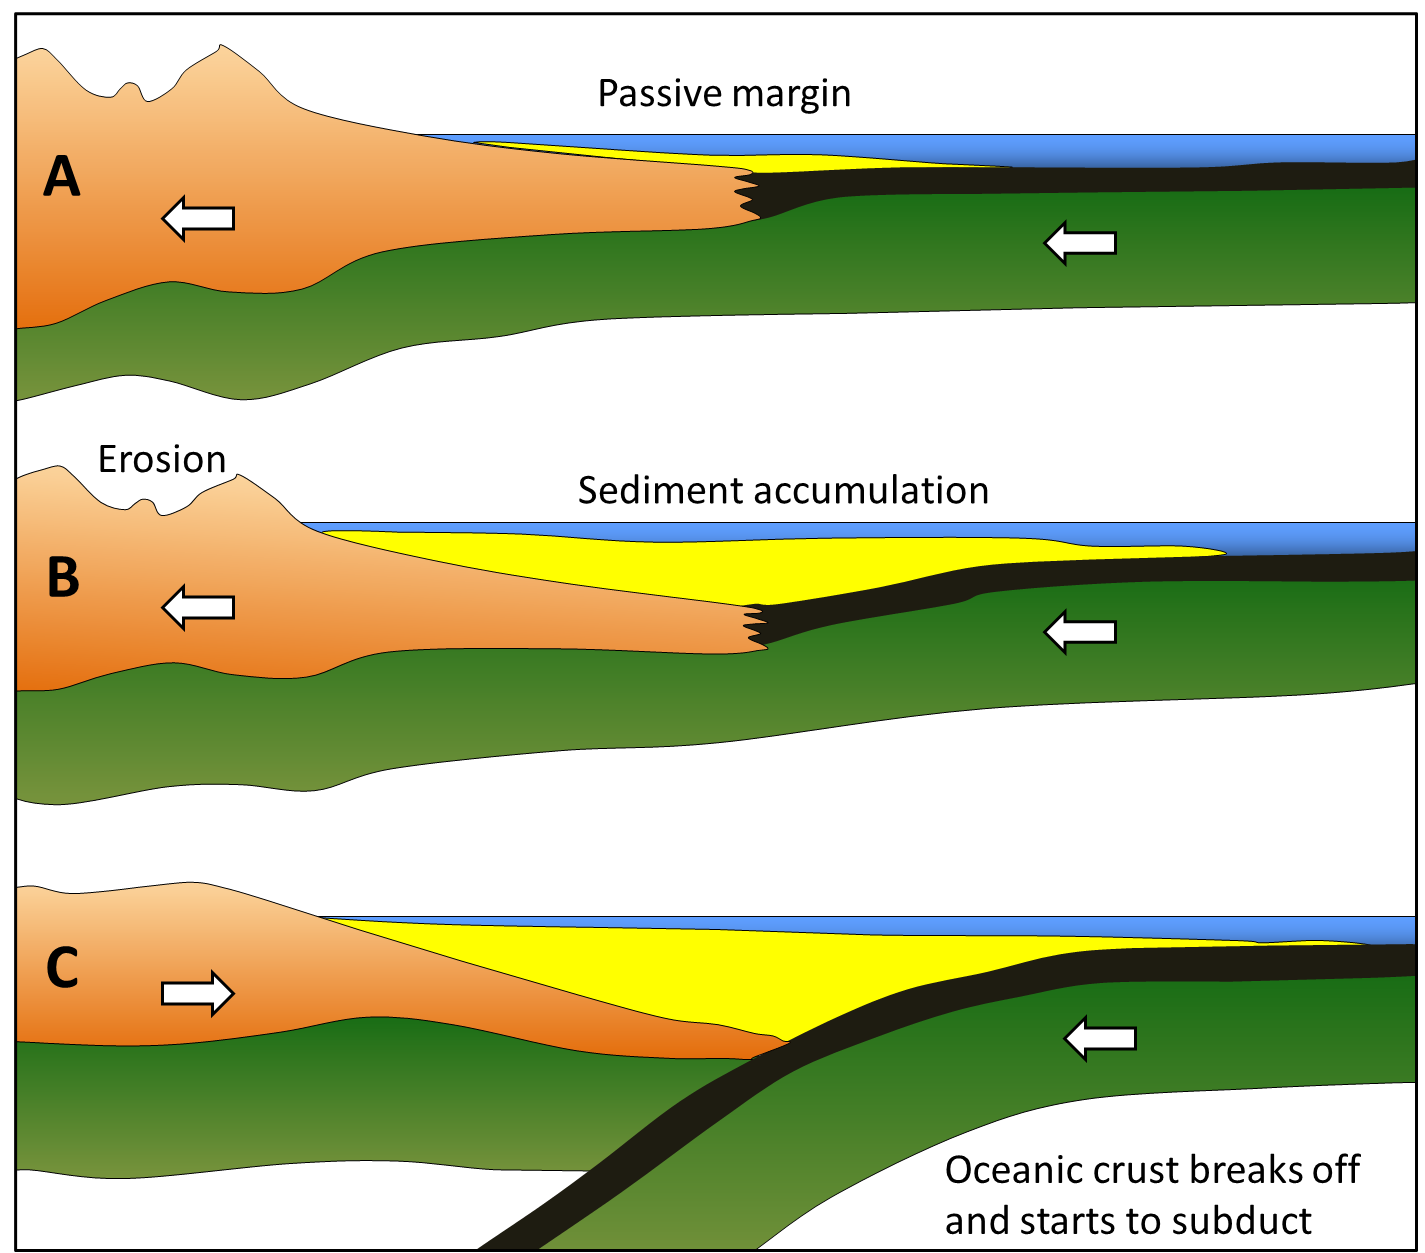 Development of a subduction zone at a passive margin. Times A, B, and C are separated by tens of millions of years. Once the oceanic crust breaks off and starts to subduct, the continental crust (North America in this case) may no longer be pushed to the west and could start to move east because the rate of spreading in the Pacific basin is faster than along the Mid-Atlantic Ridge. _Source: Steven Earle (2015) CC BY 4.0 [view source](http://opentextbc.ca/geology/wp-content/uploads/sites/110/2015/07/image067.png)_